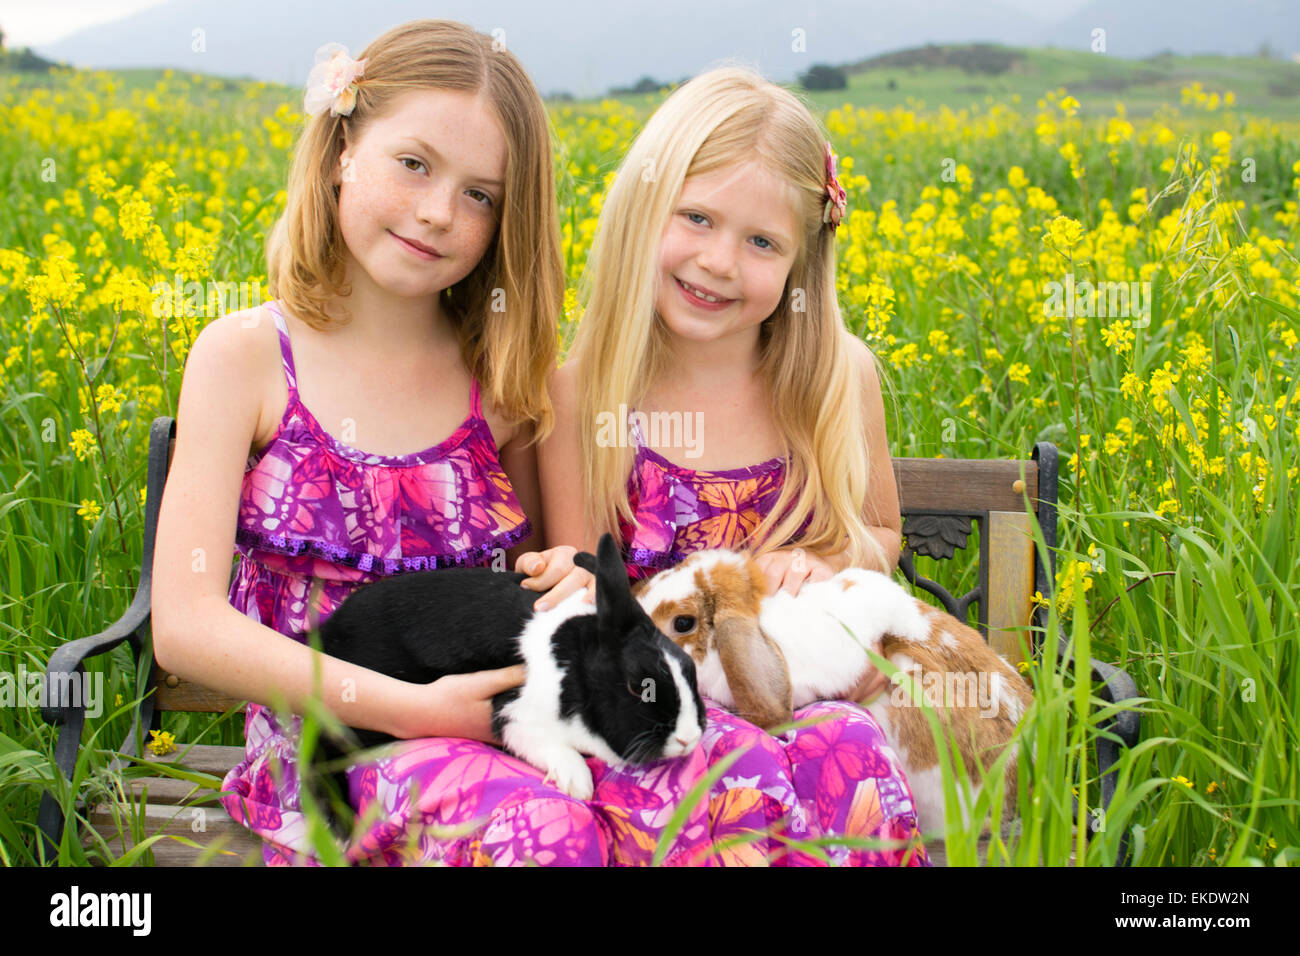 Two  lovely sisters hold bunnies while sitting on a bench in a field of yellow flowers. Stock Photo